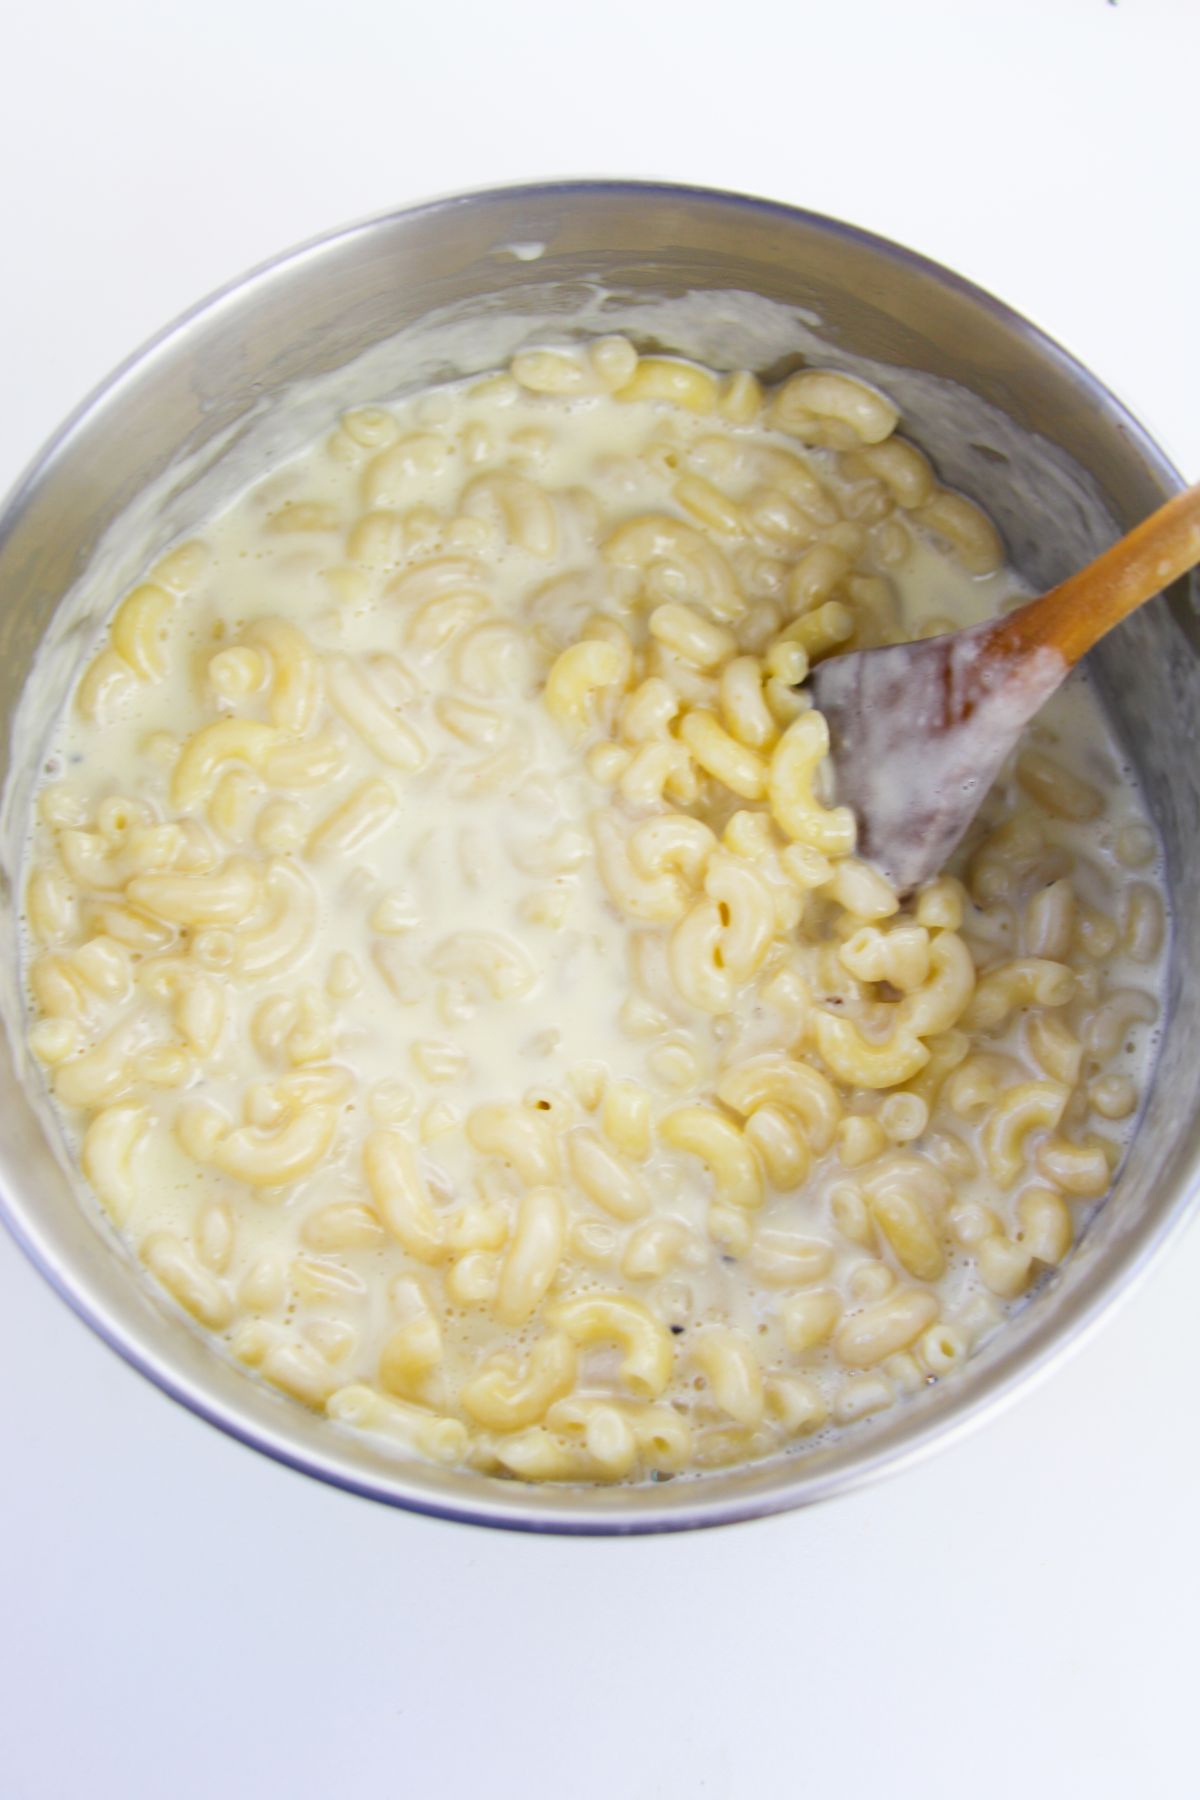 Macaroni pasta and cheese mixture in a saucepan.